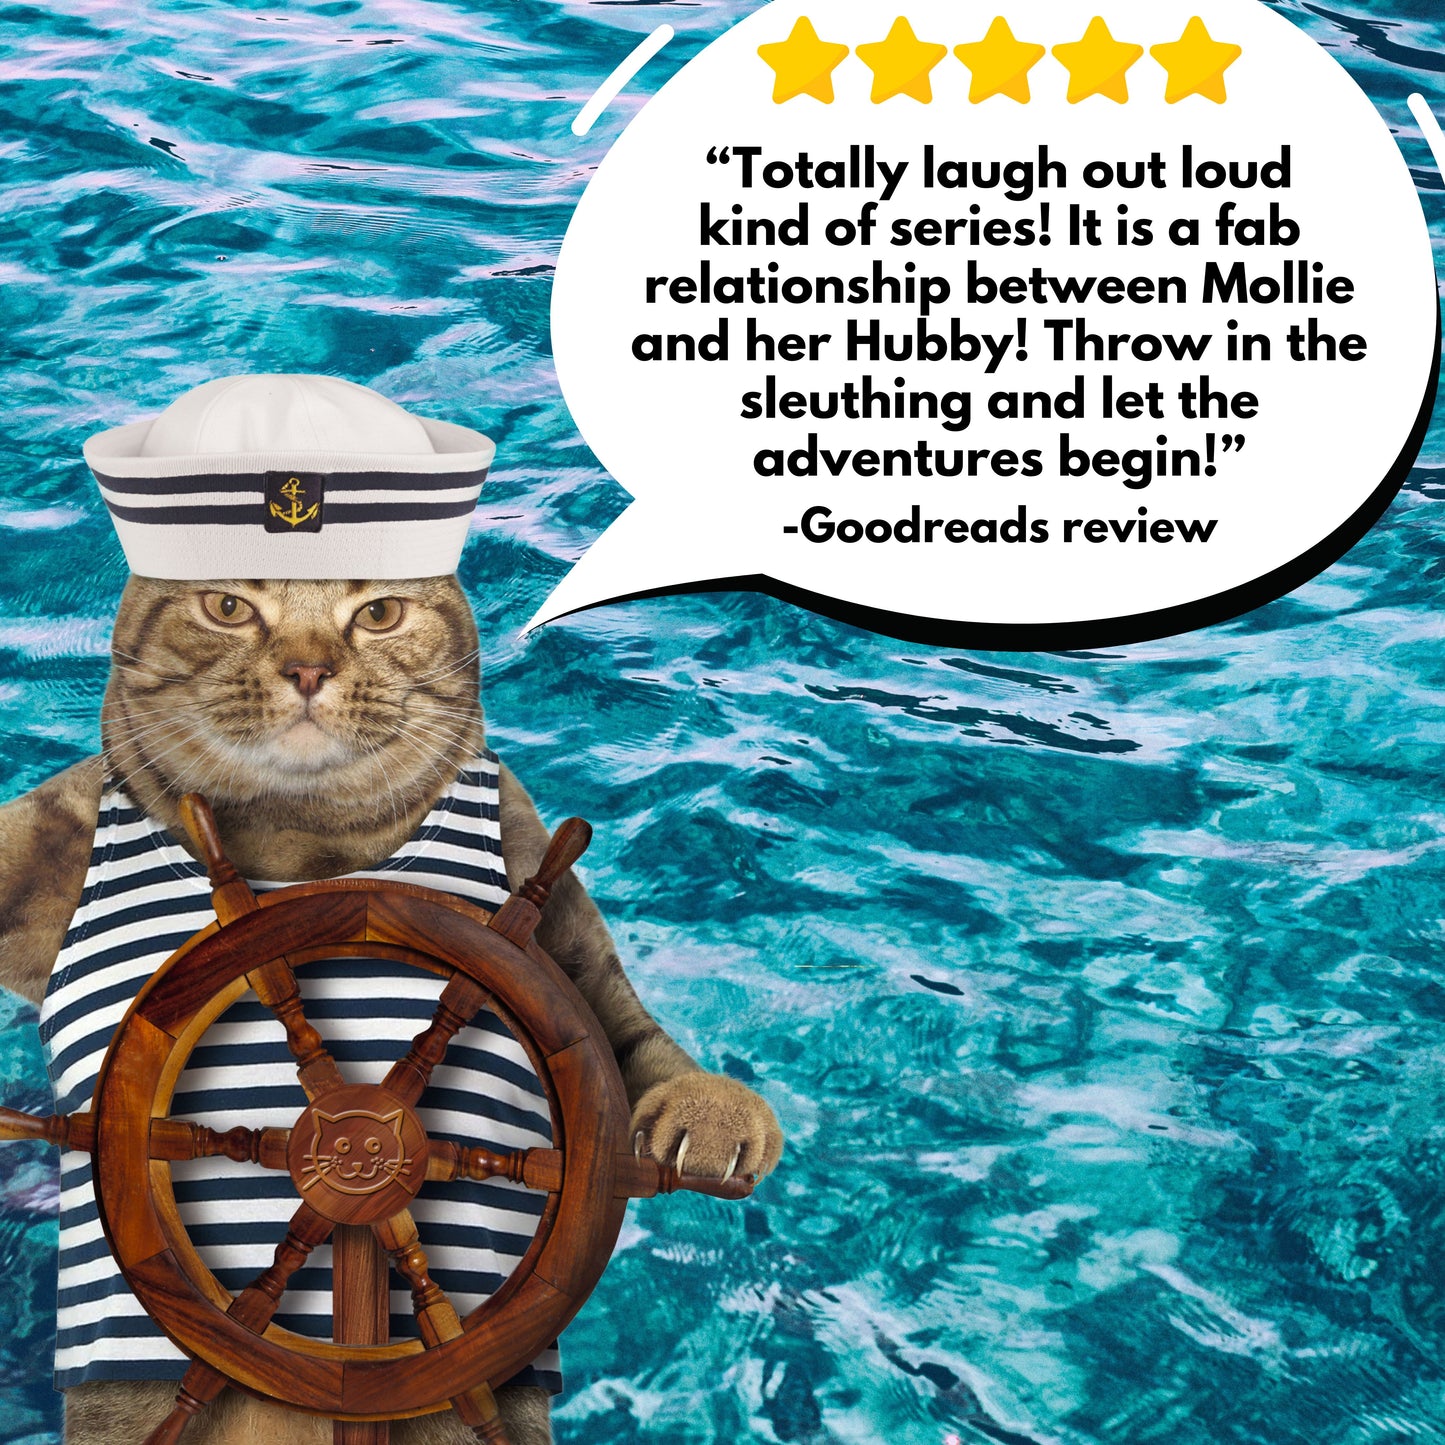 5 Star Review of the Mollie McGhie Cozy Sailing Mystery Series